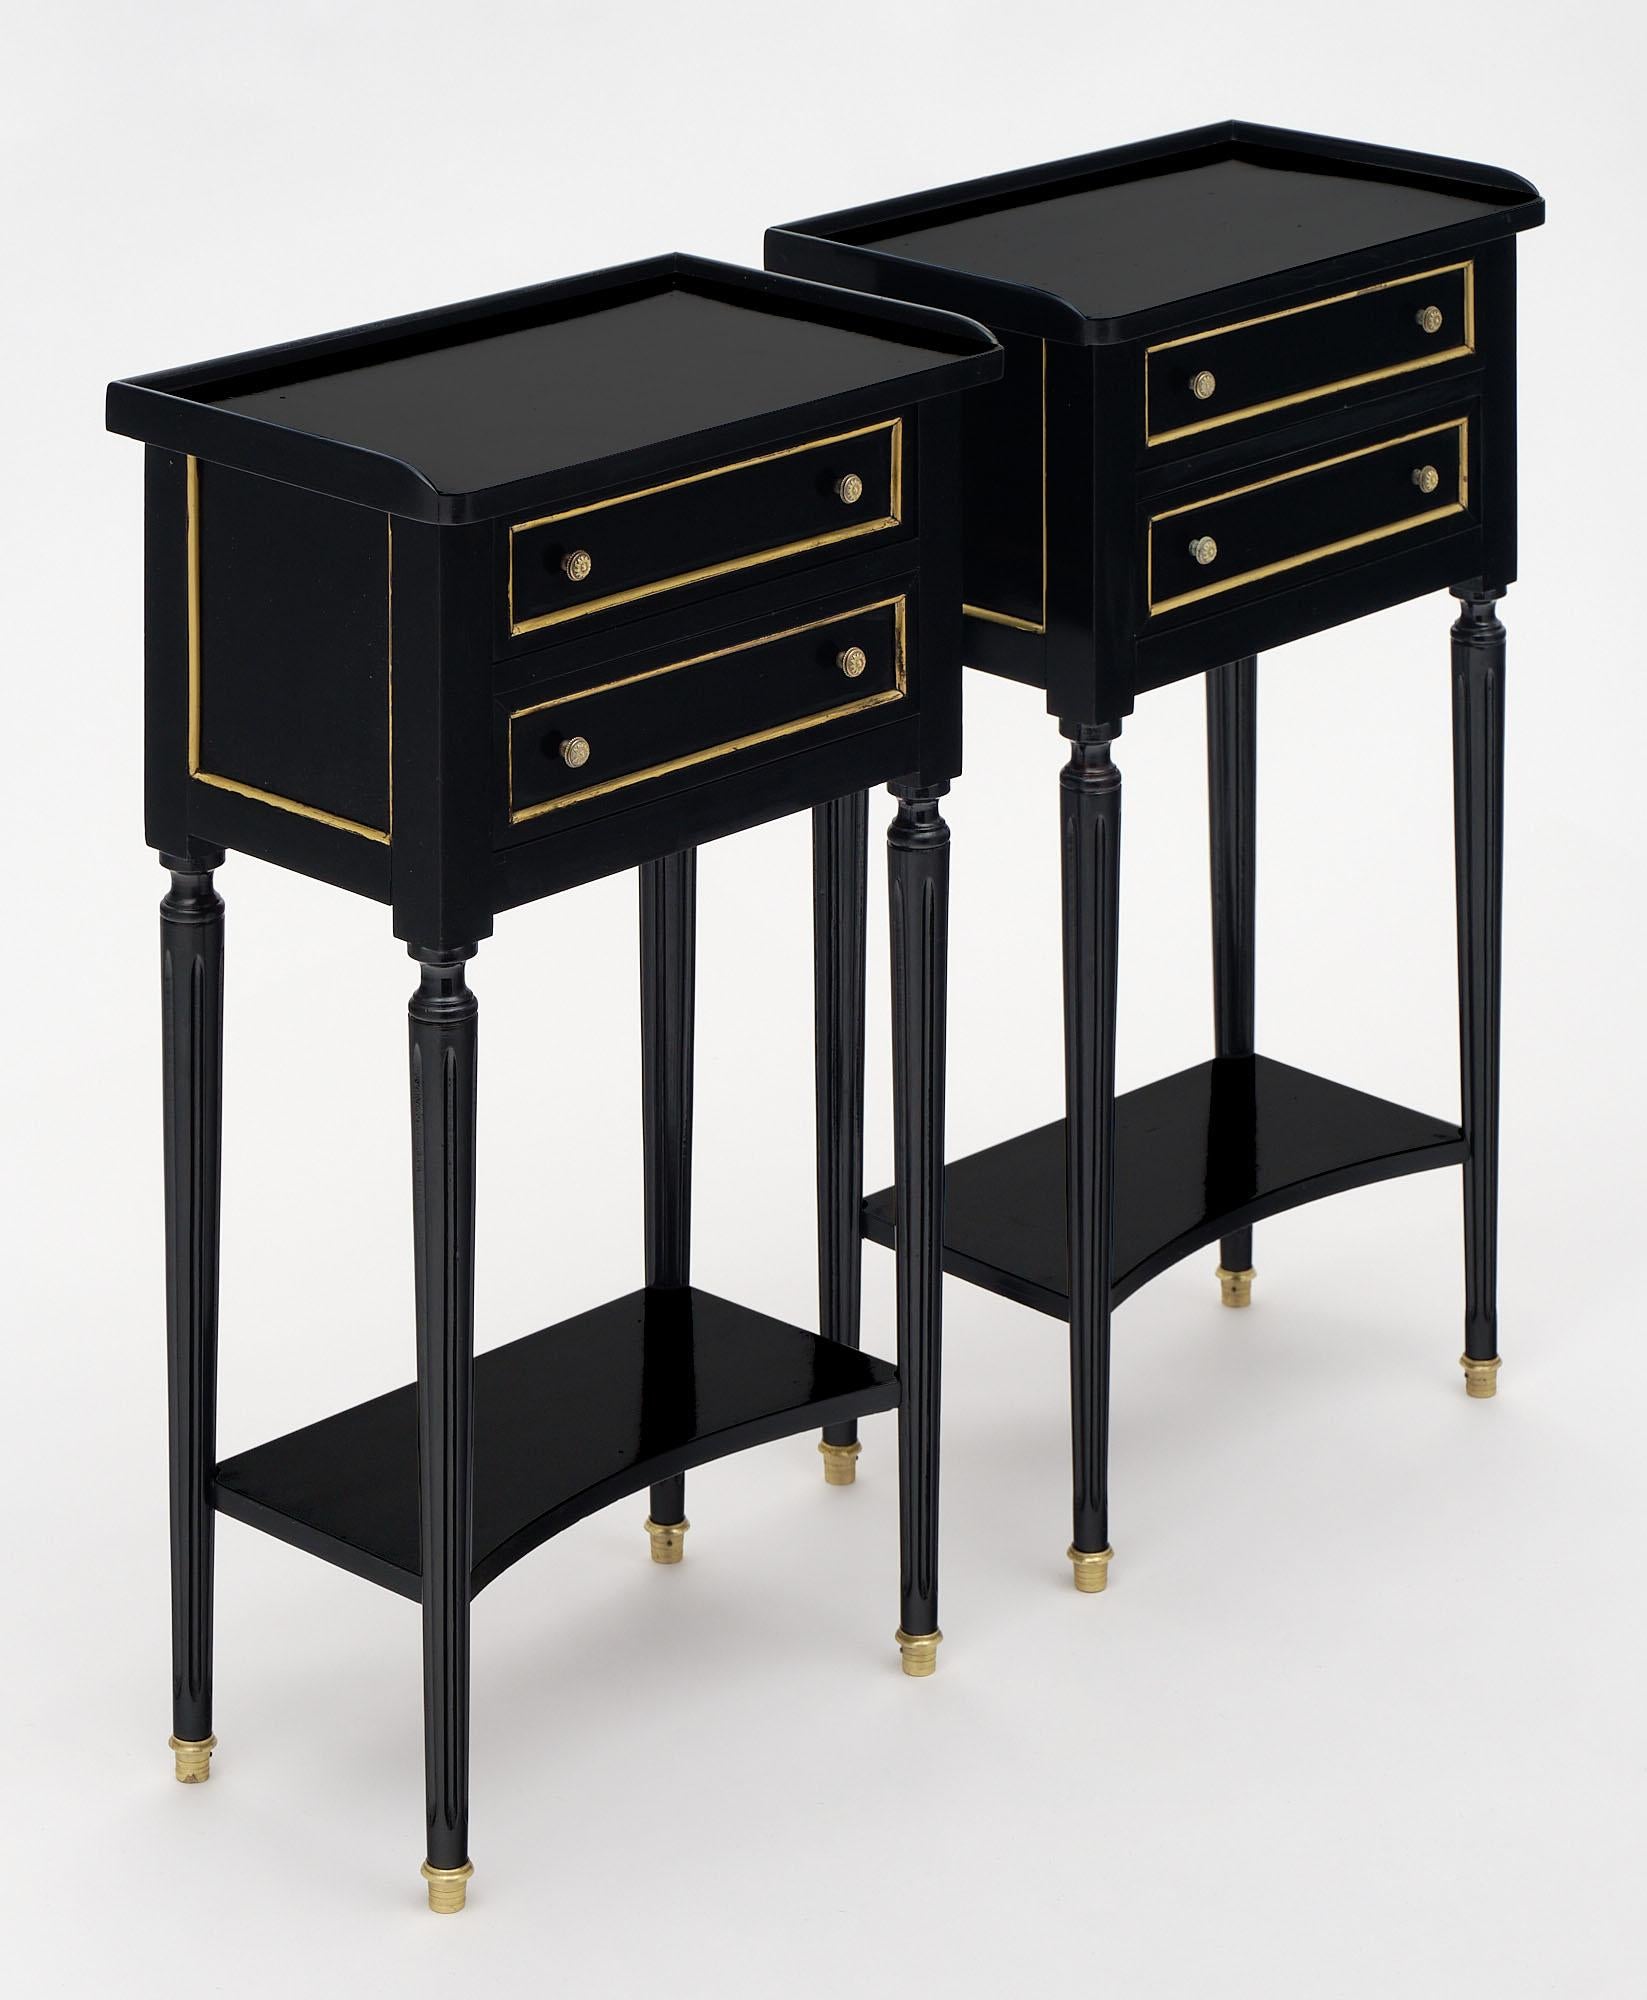 Pair of side tables from France in the Louis XVI style. Each table has two dovetailed drawers with gilt brass trim throughout. They have finely cast bronze knobs. The legs are tapered and fluted with a supportive bottom shelf. They are ebonized and